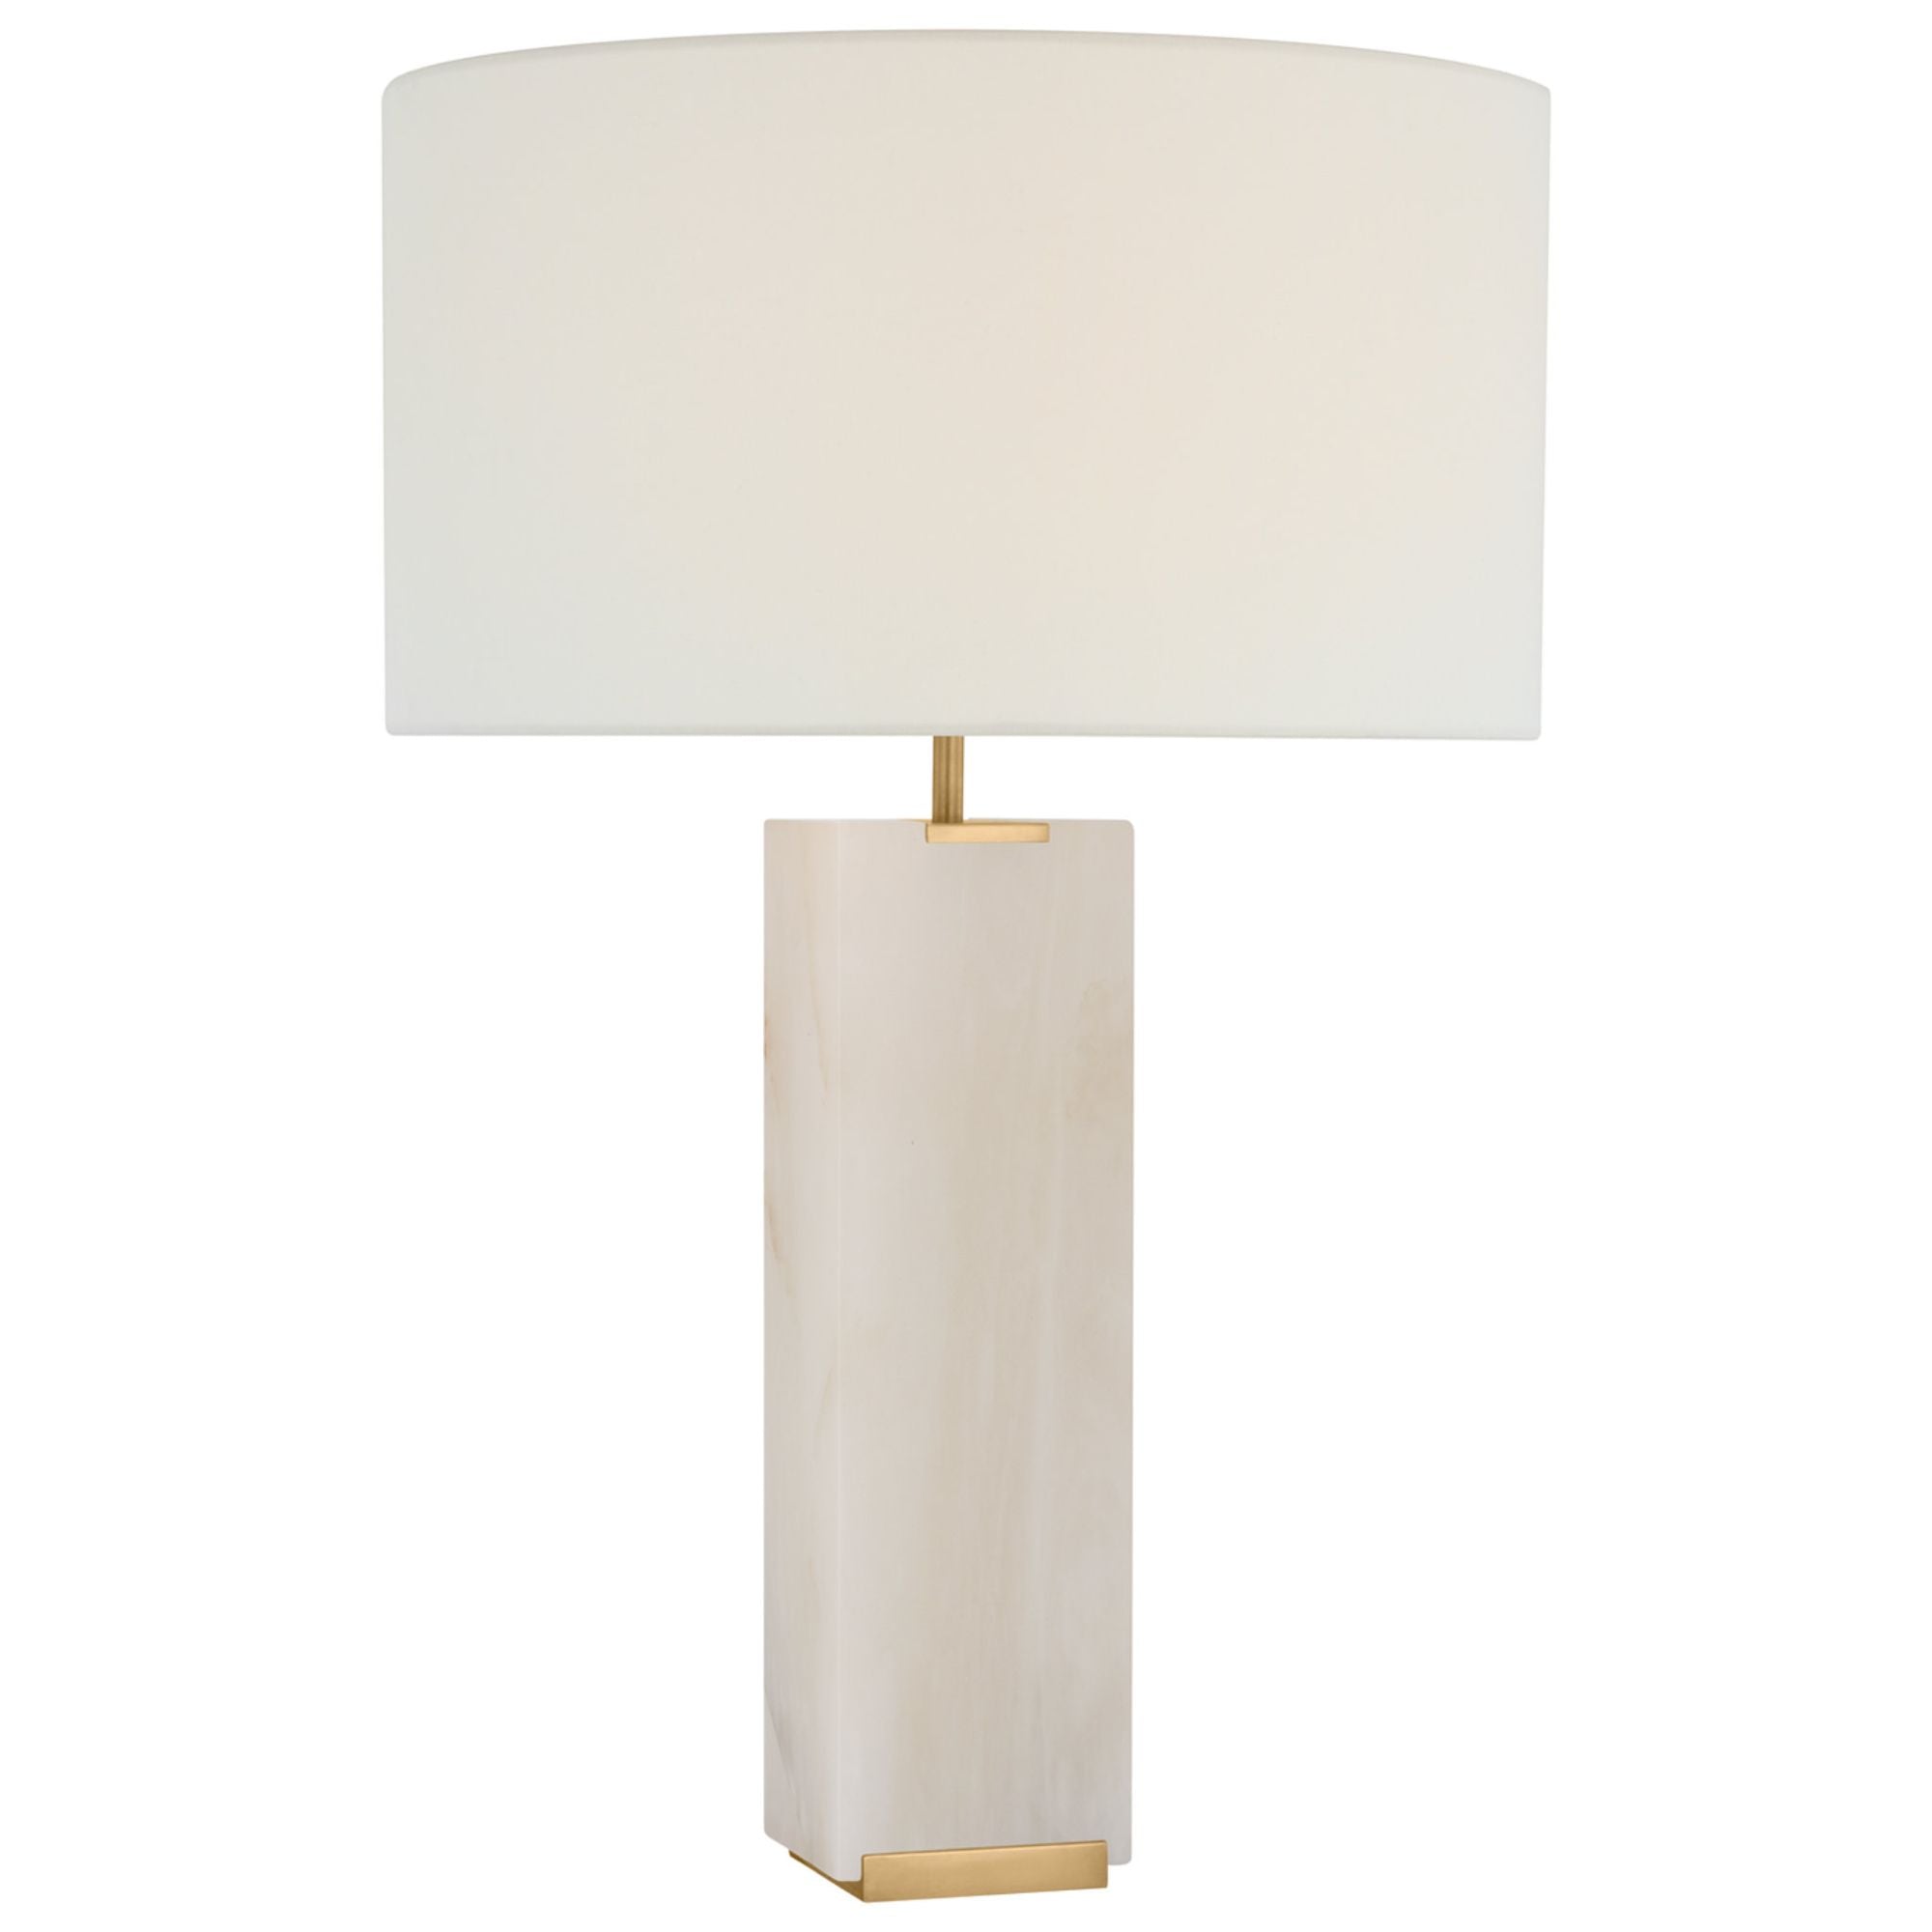 Ian K. Fowler Matero Tall Table Lamp in Alabaster with Linen Shade